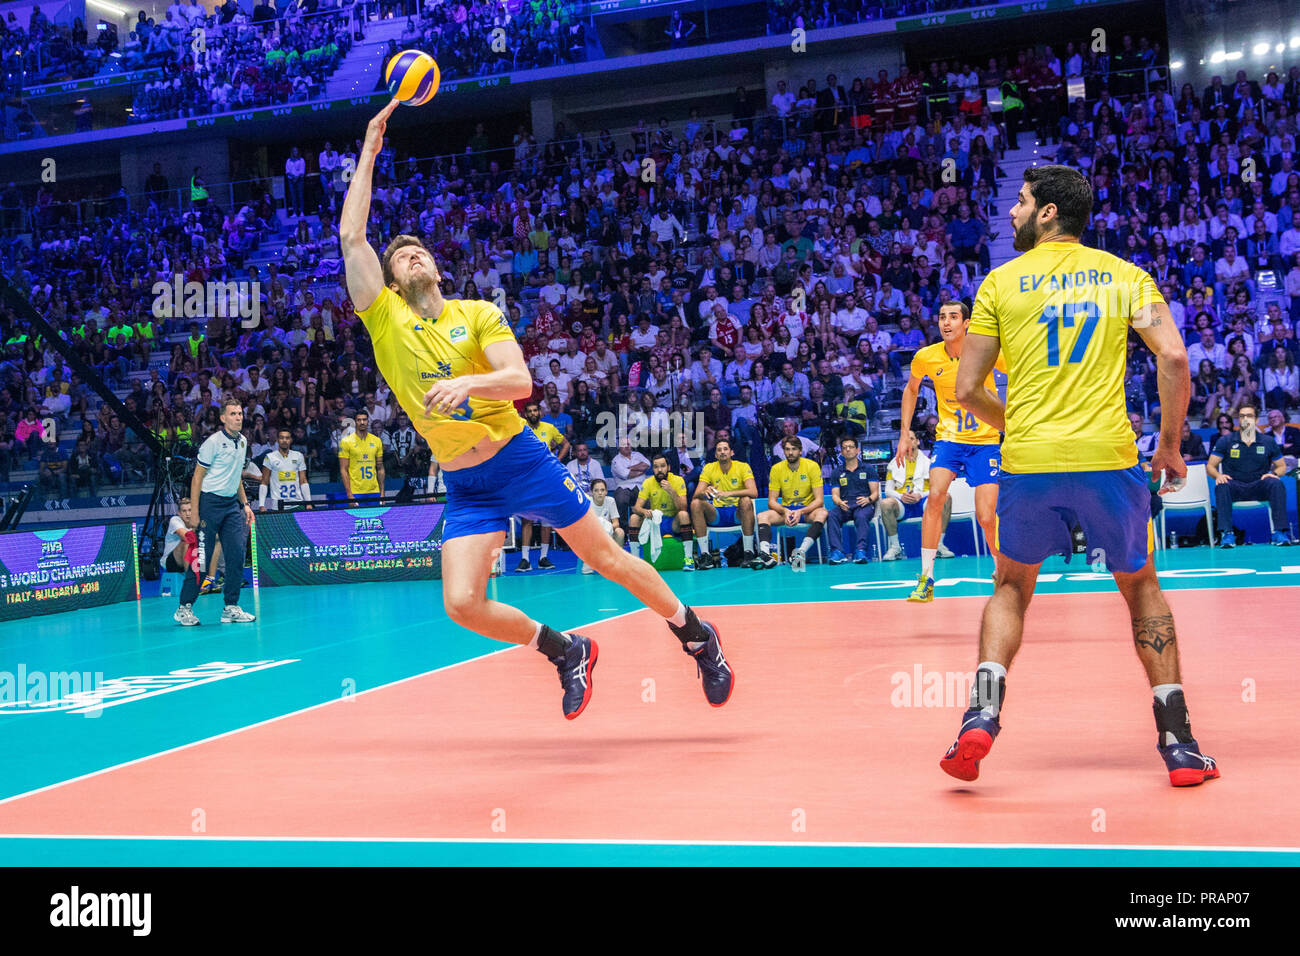 Torino,Italy 30th september 2018. Eder Carbonera (3) of Brazil play the ball  at the Final 2-1- Men of 2018 FIVB World Championship held in  Turin, Italy Credits: Mauro Ujetto/Alamy Live News Stock Photo